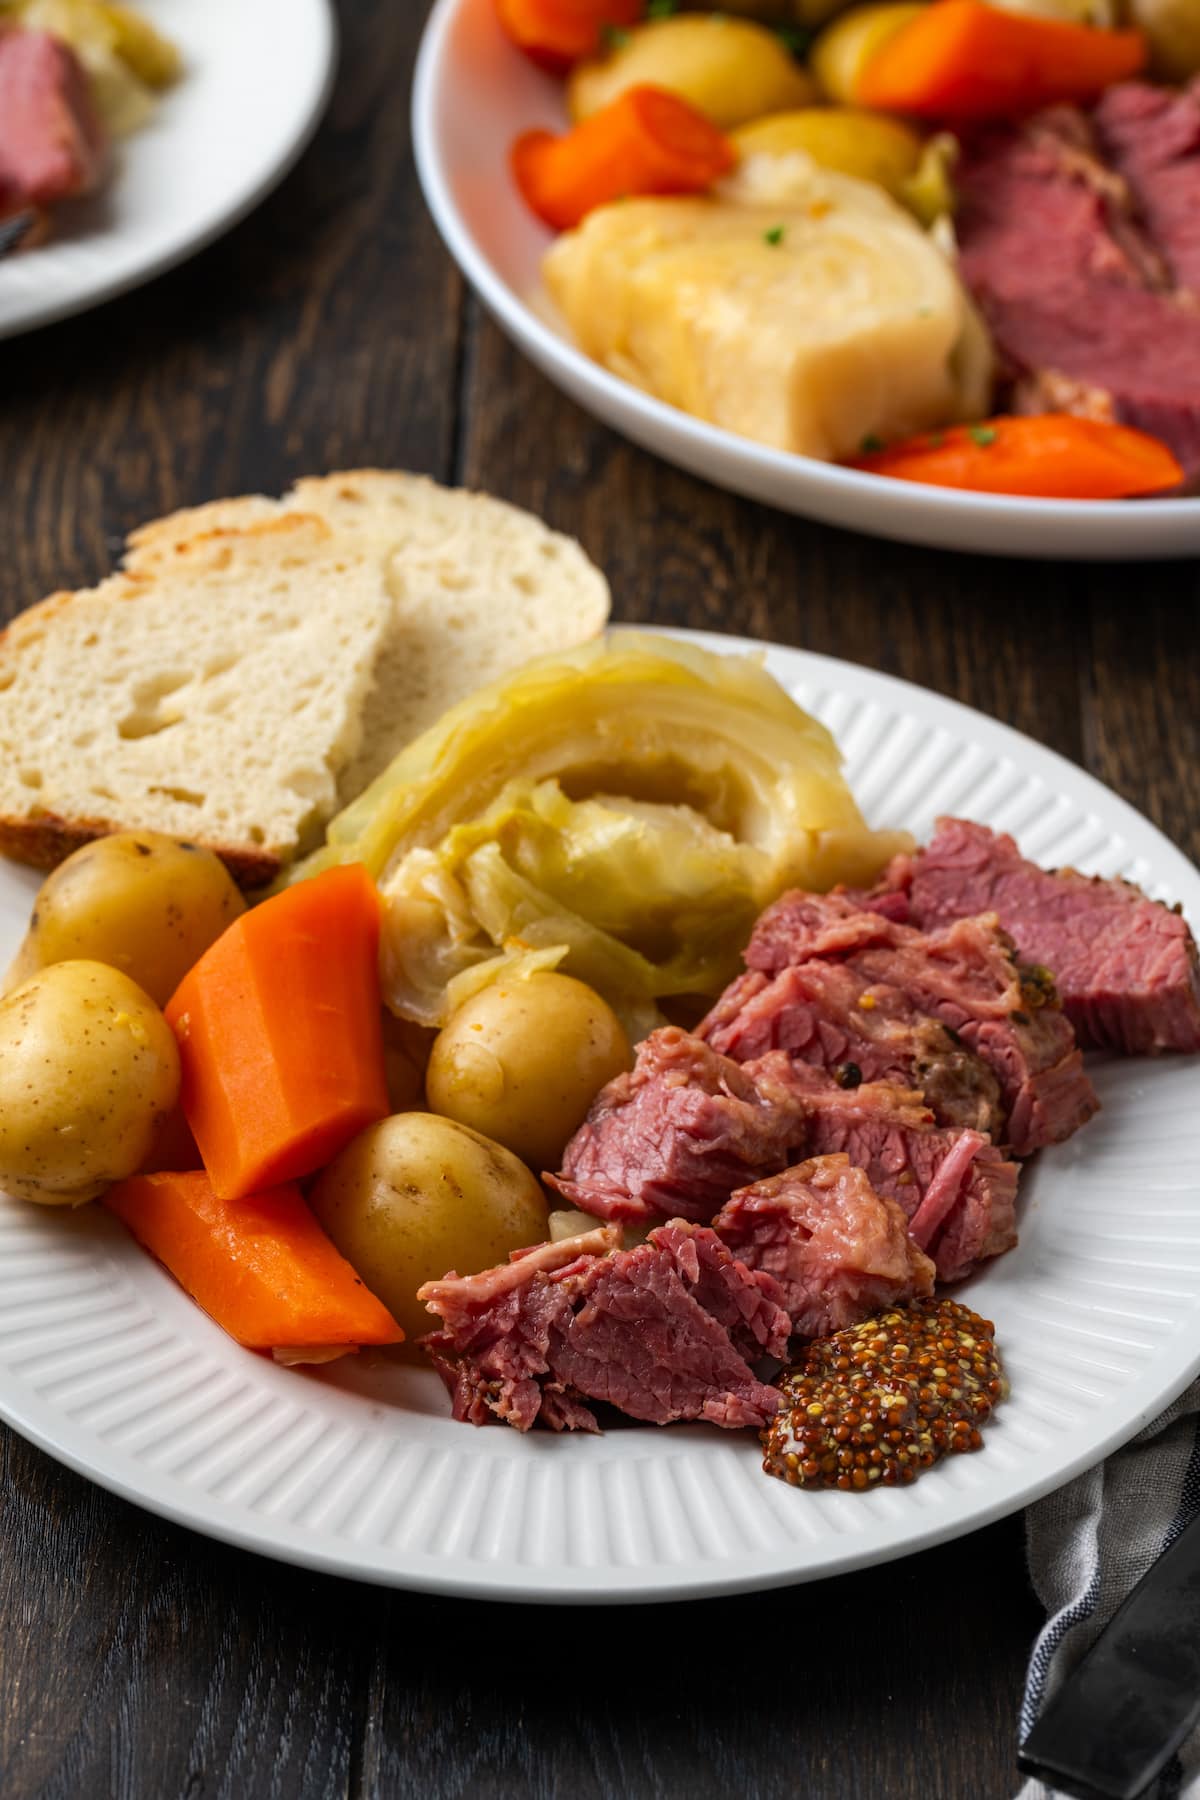 Sliced corned beef on a plate next to cabbage, potatoes, carrots, and bread slices, with a second plate in the background.